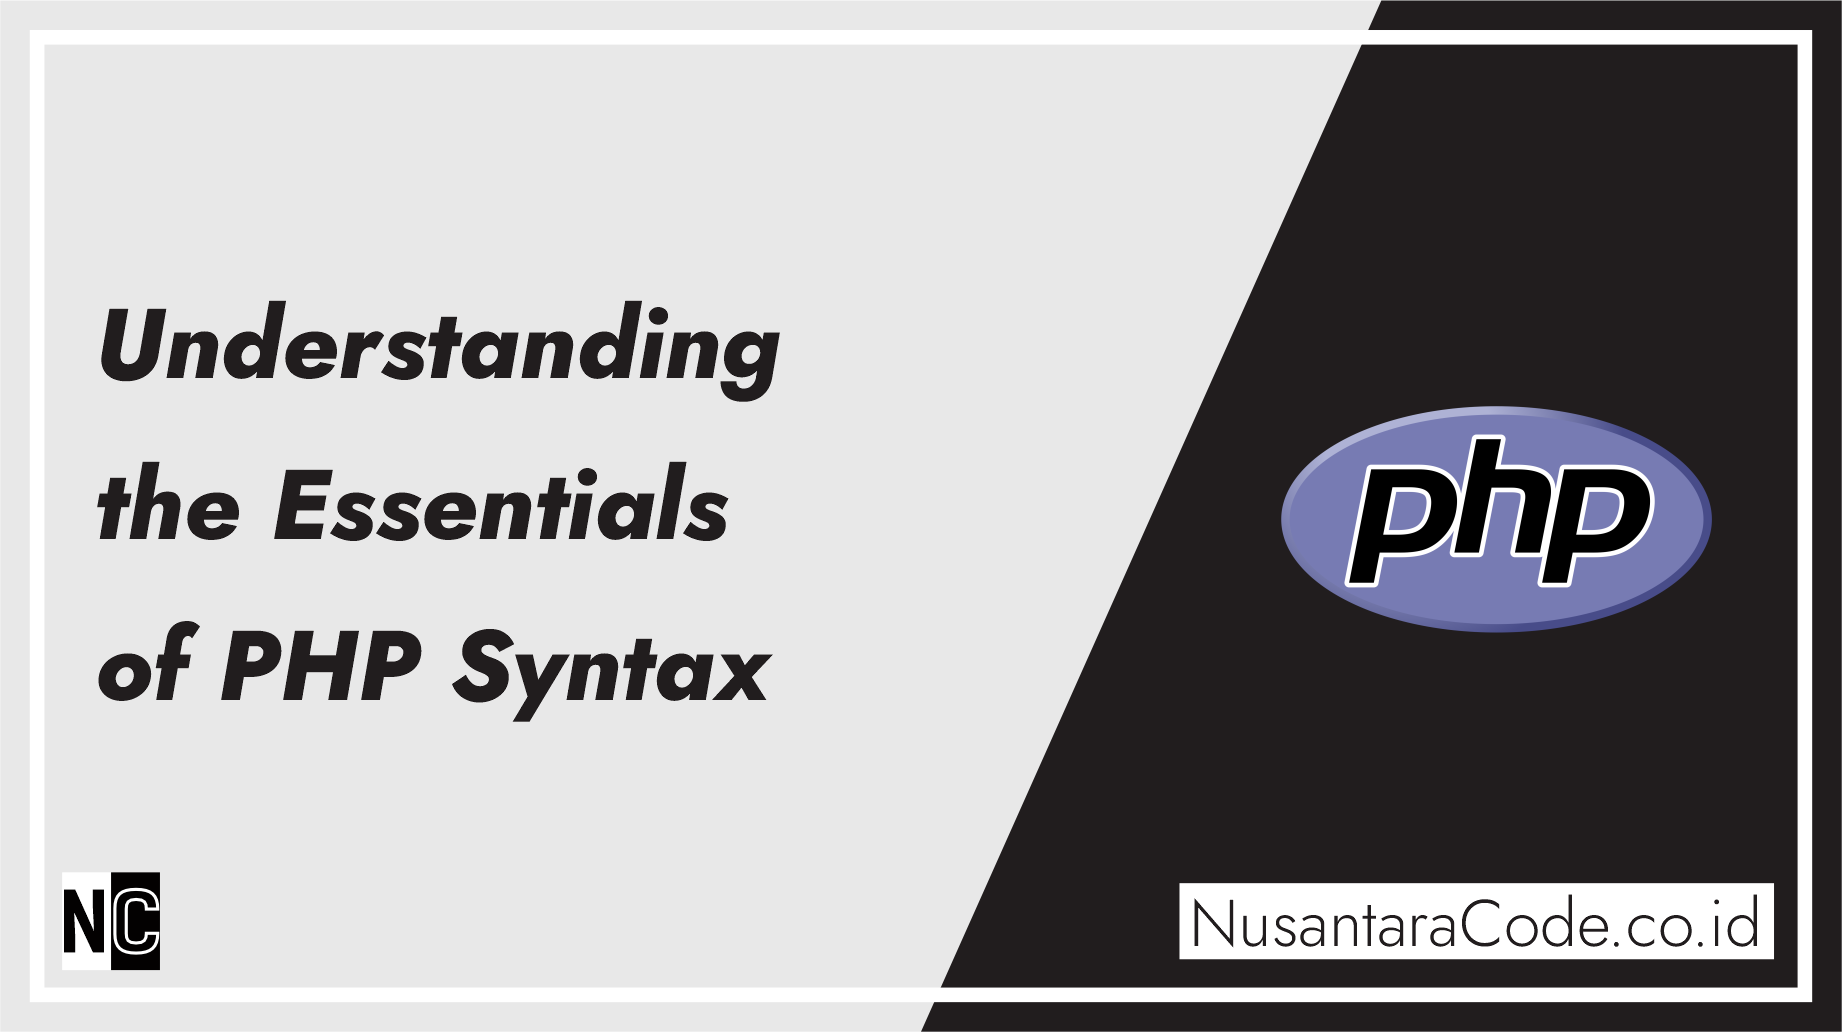 Understanding the Essentials of PHP Syntax